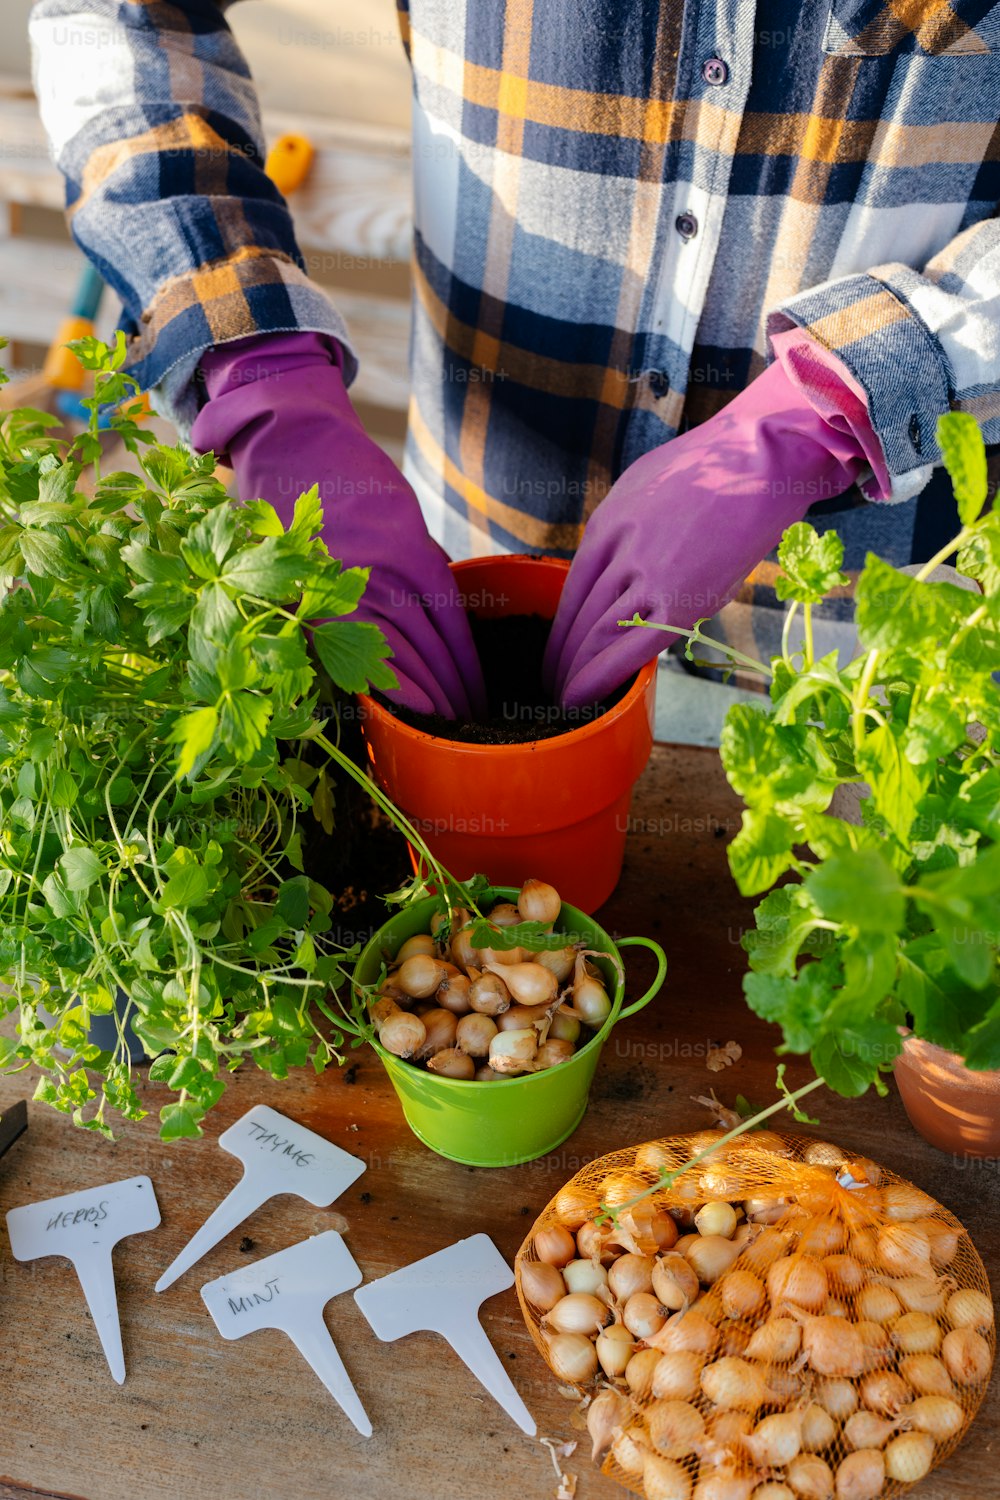 a person wearing purple gloves and gardening gloves next to potted plants